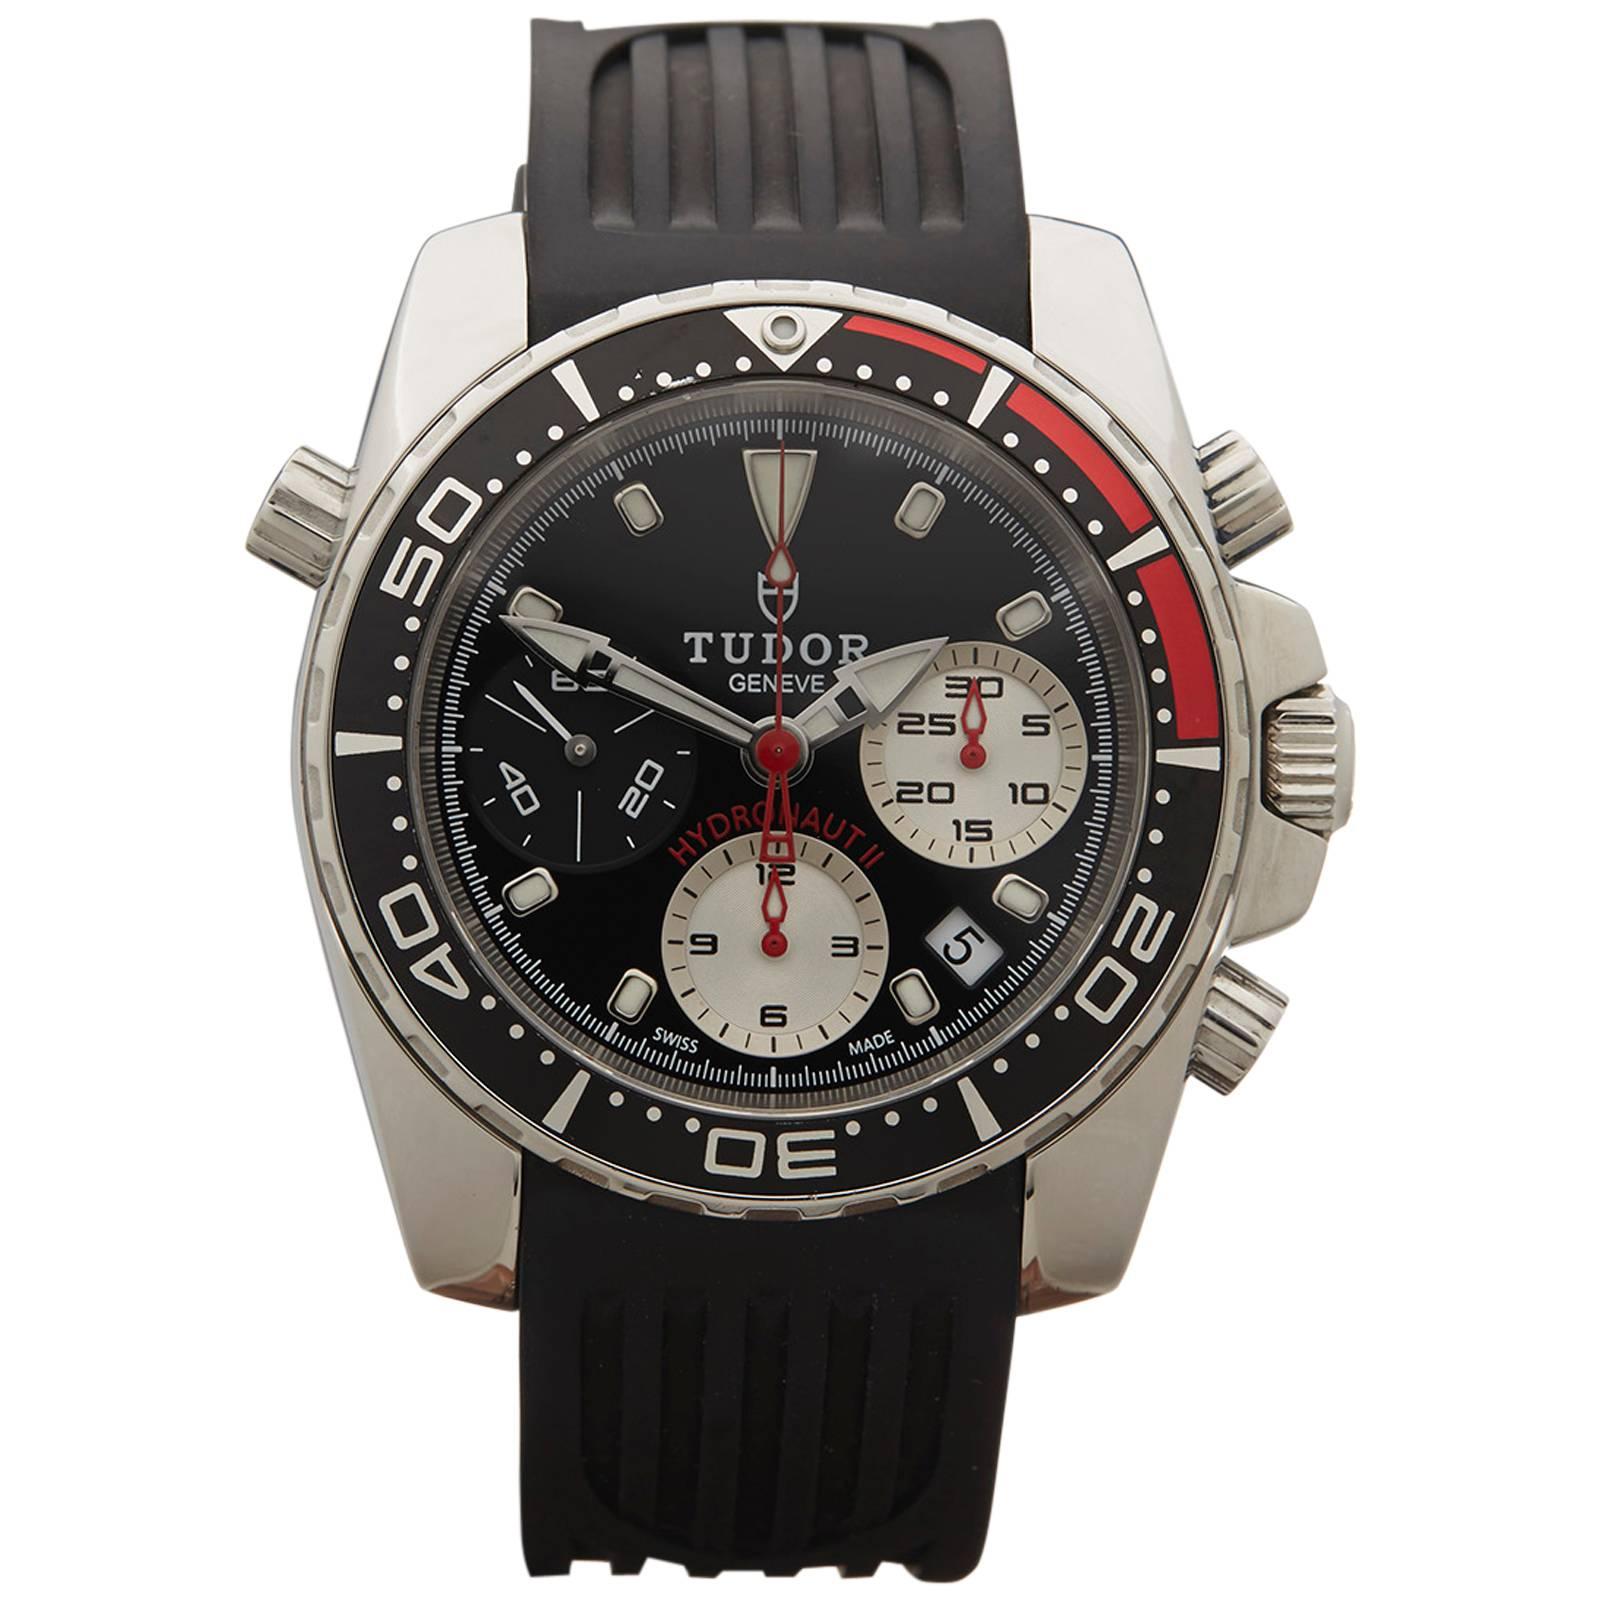 Tudor Stainless Steel Hydronaut II Chronograph Stainless Steel Wristwatch